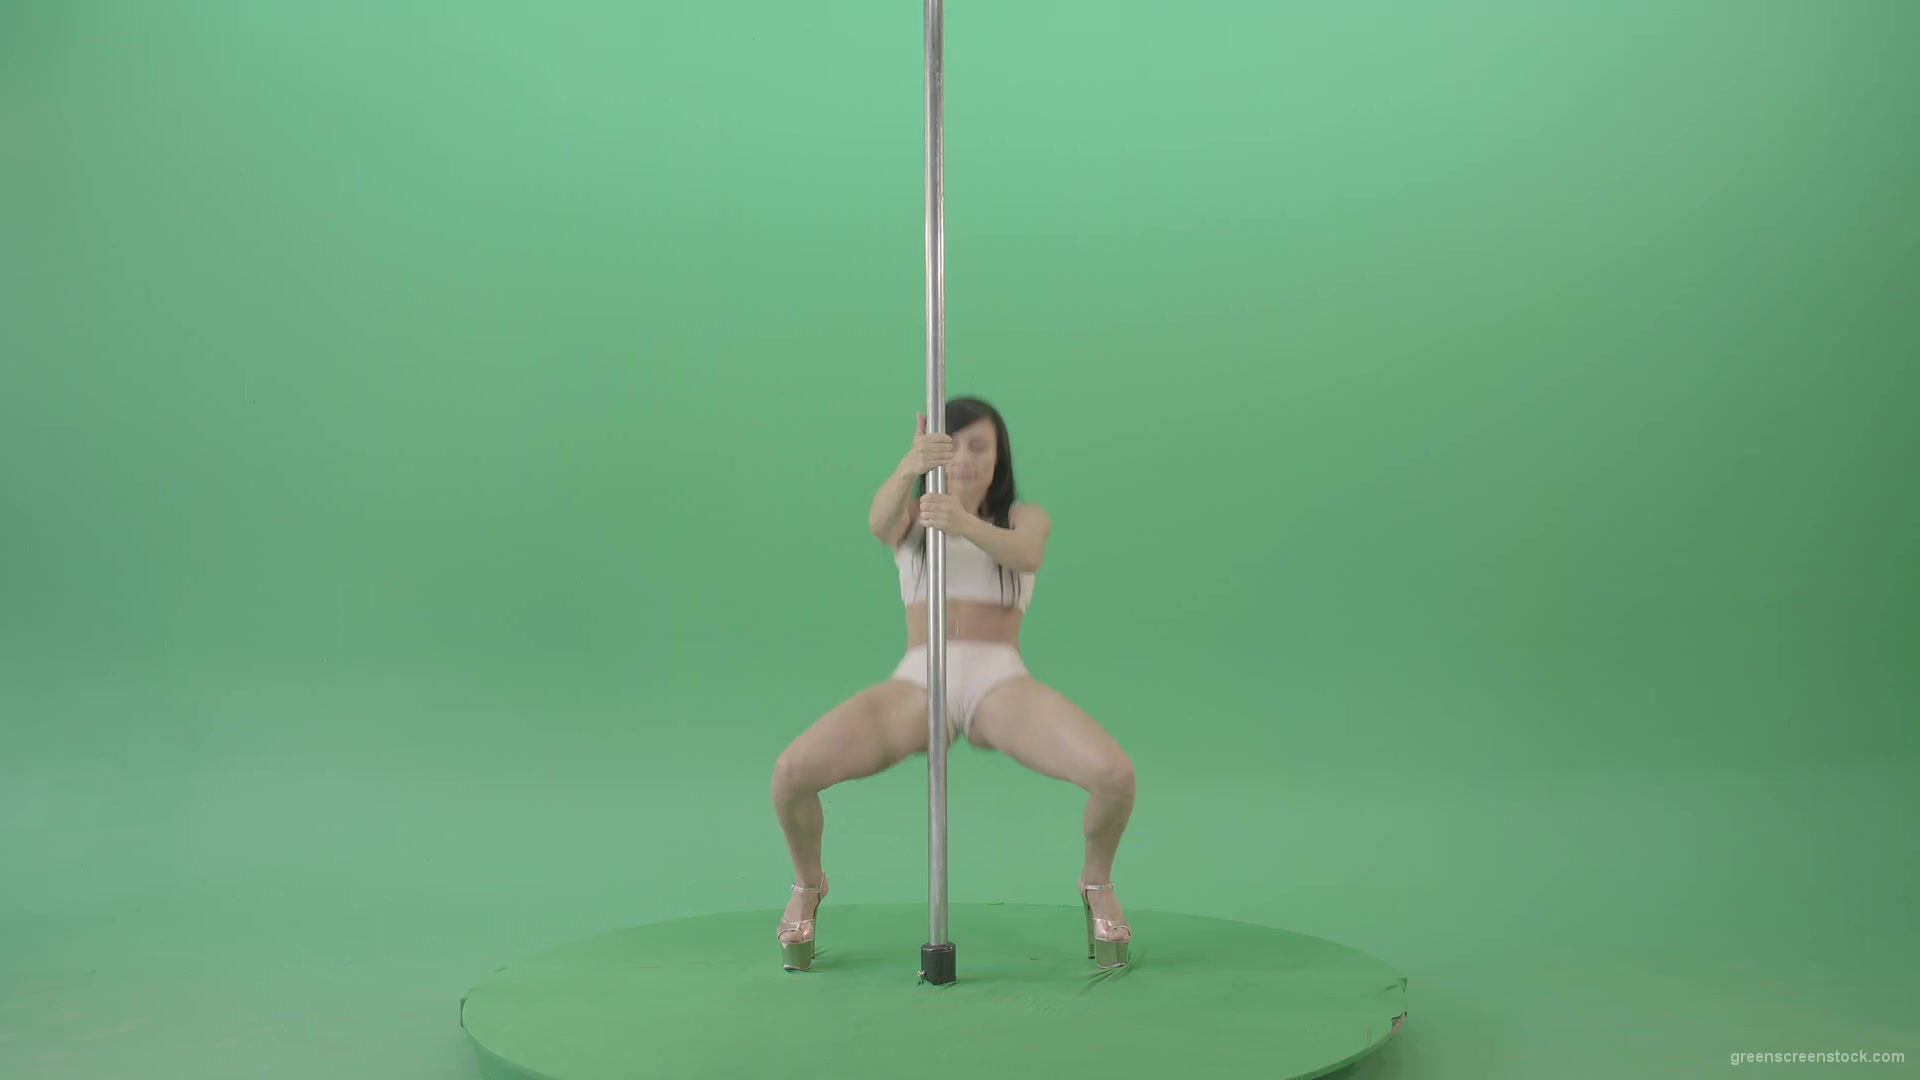 Pole-Dance-sport-girl-waving-sexy-body-isolated-on-green-screen-4K-Video-Footage-1920_007 Green Screen Stock